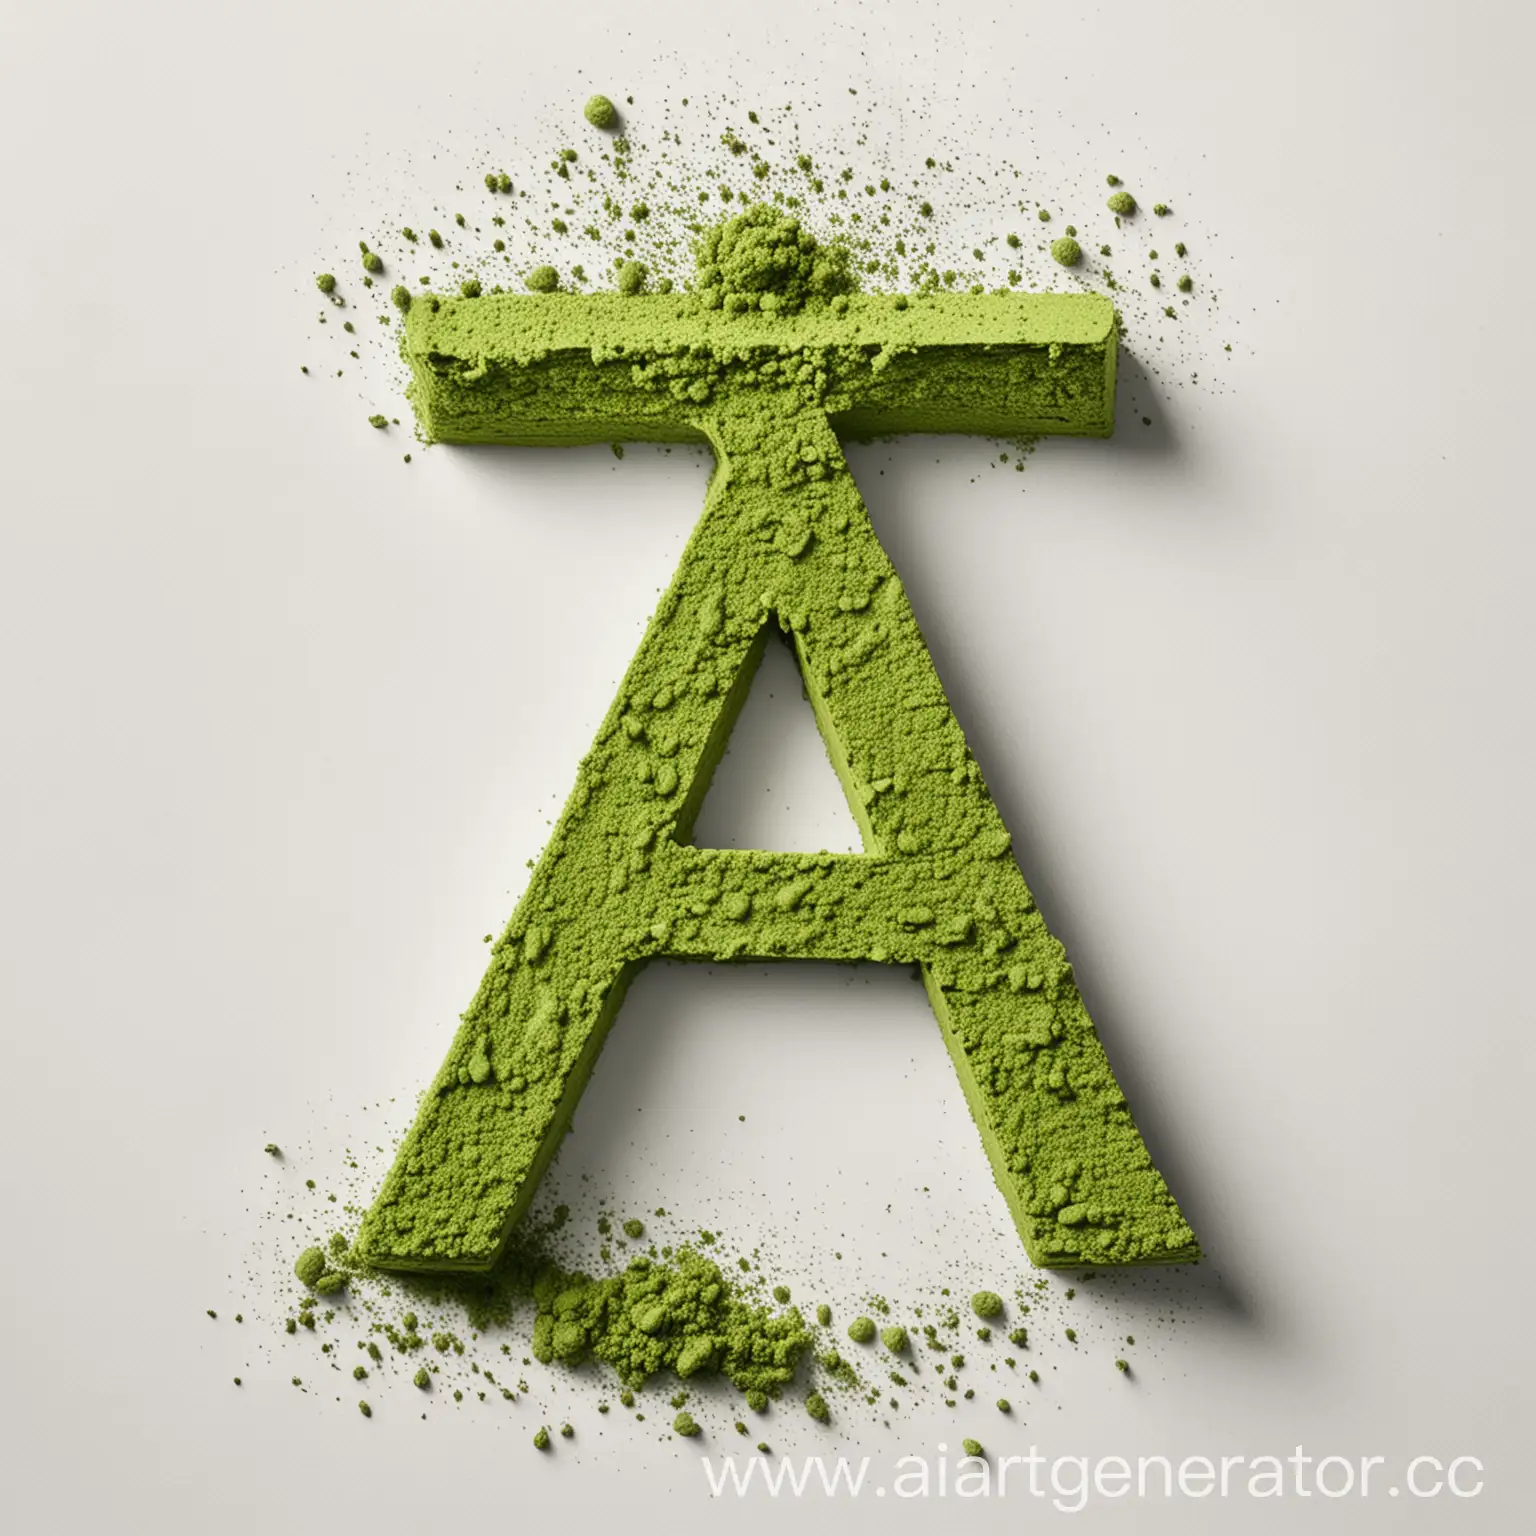 Green-Matcha-Powder-Letter-A-on-White-Background